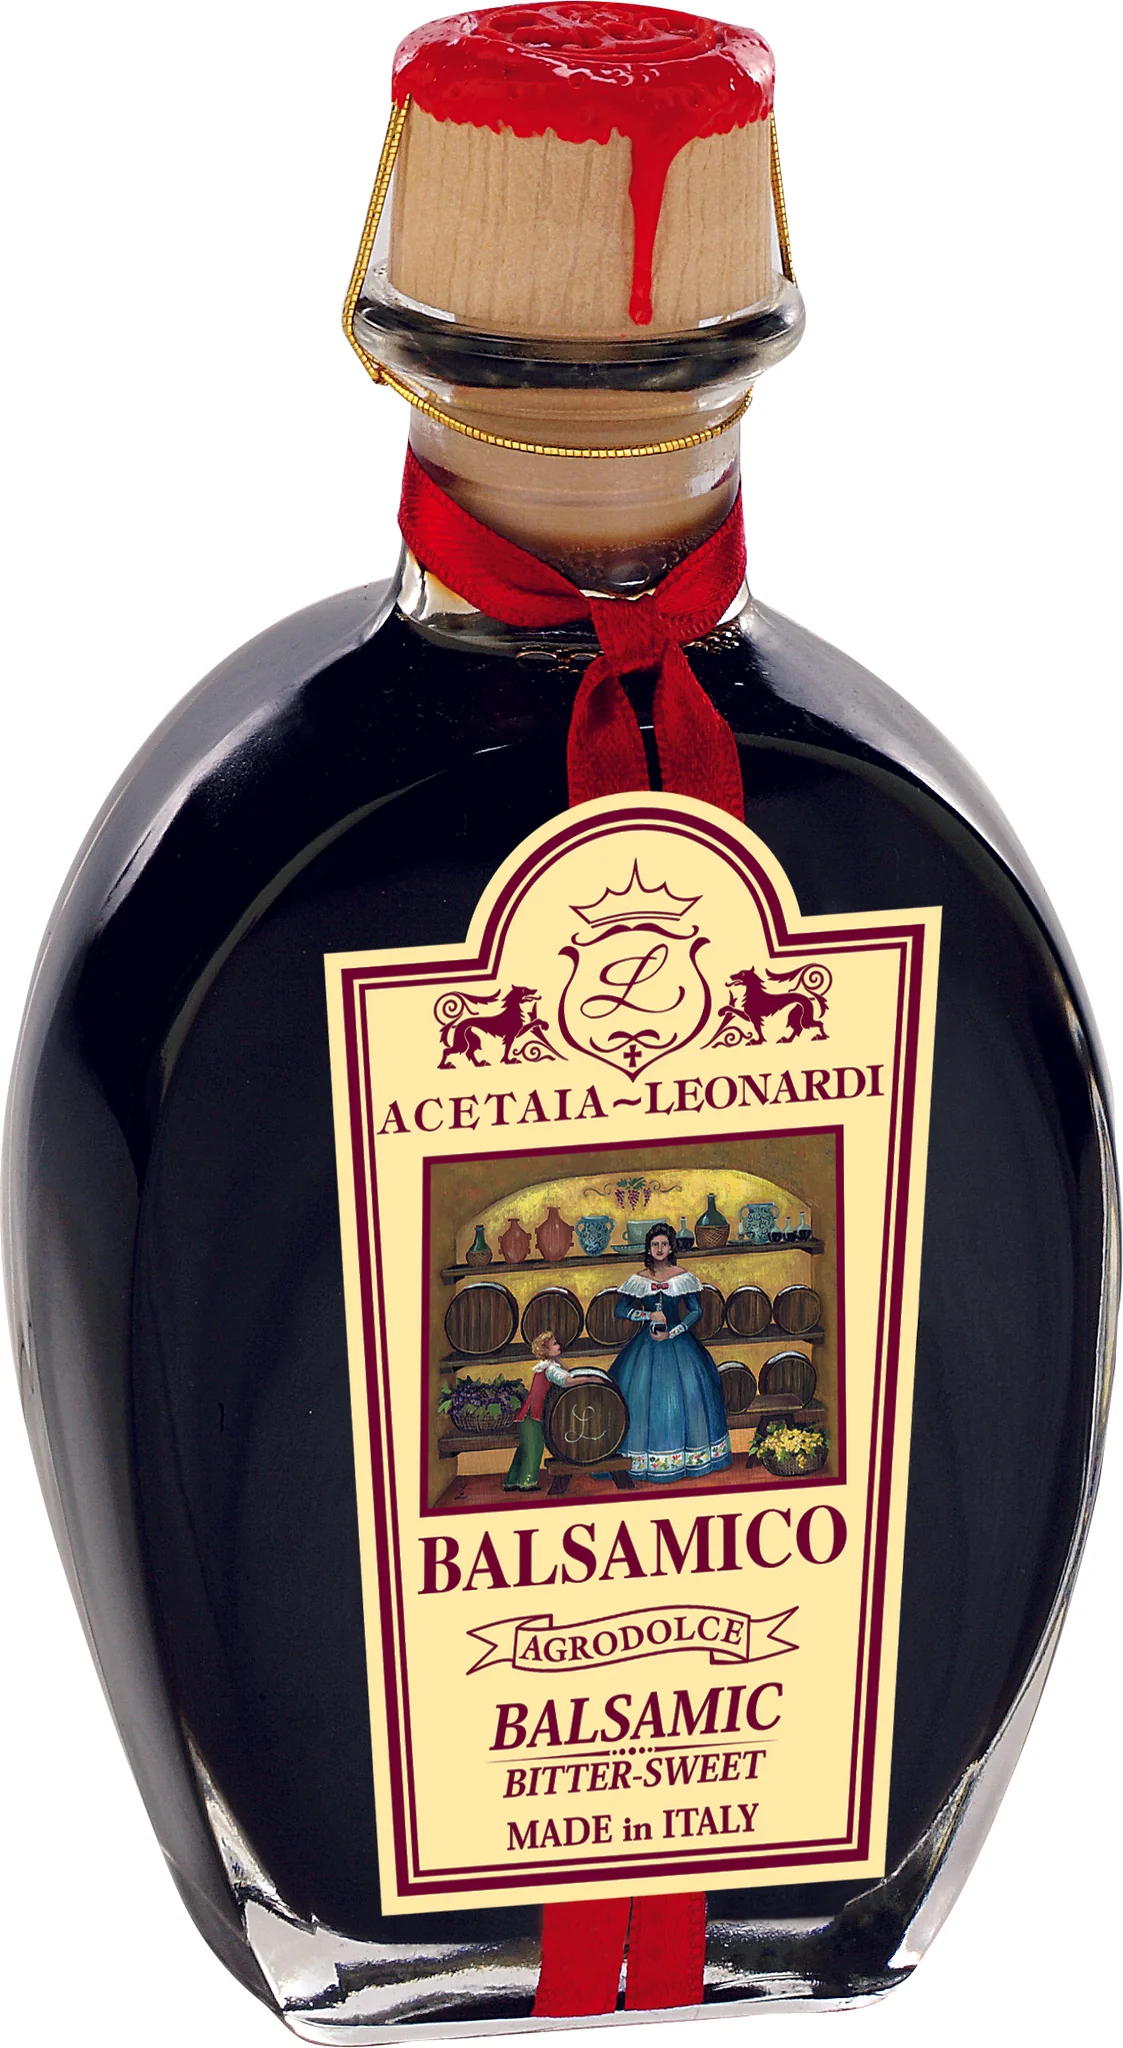 Balsamico Pure Unblended 5 Year Old Balsamic